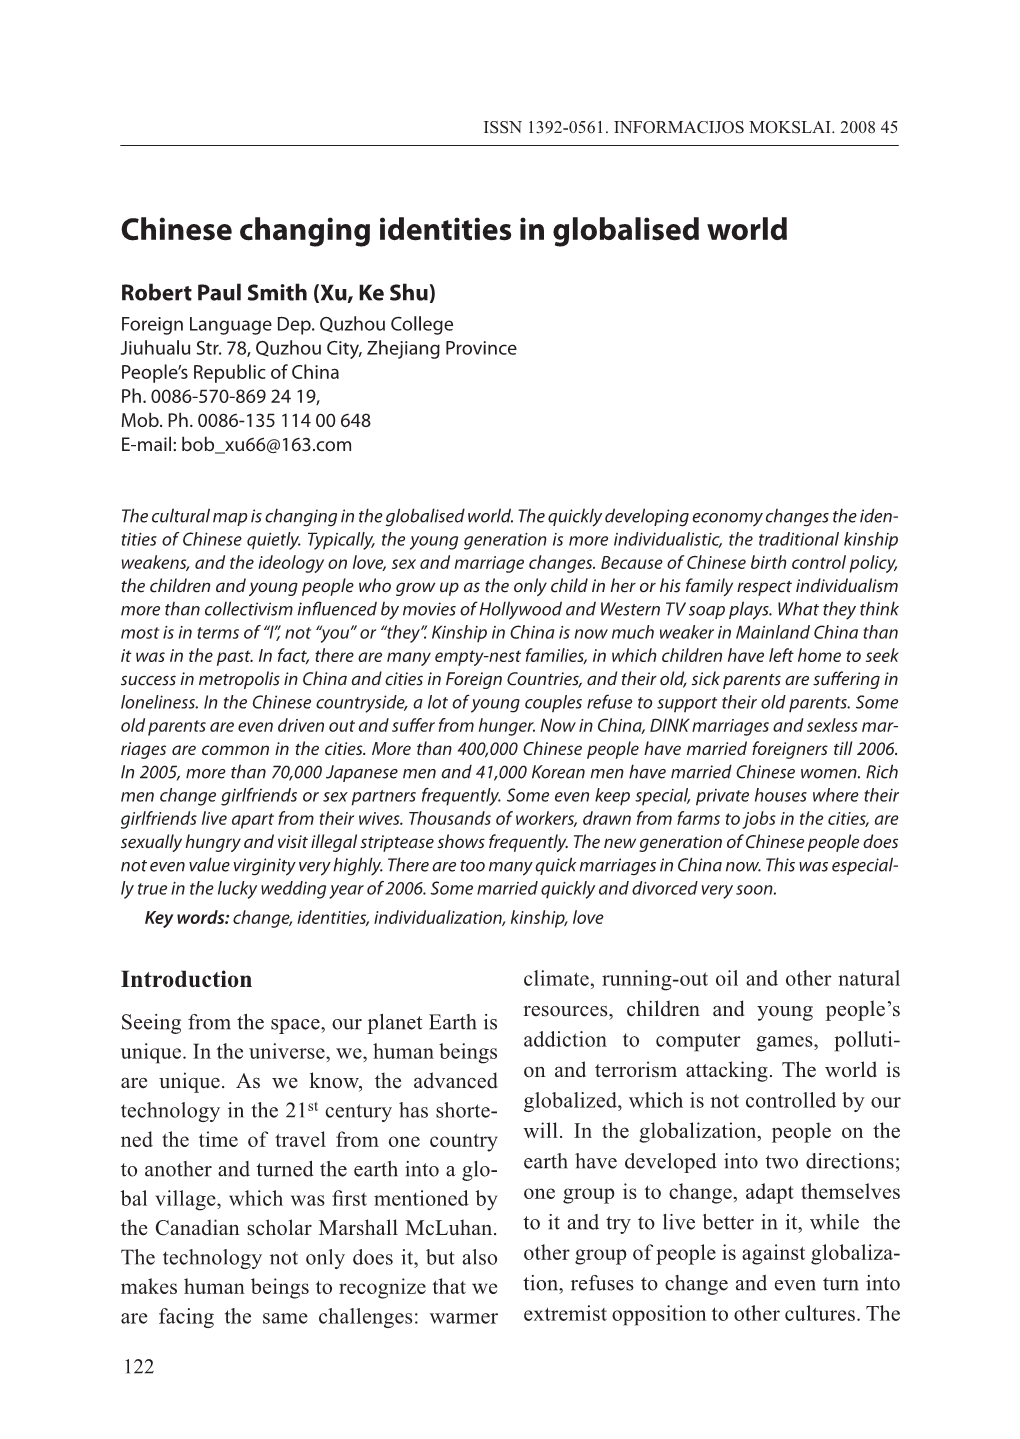 Chinese Changing Identities in Globalised World